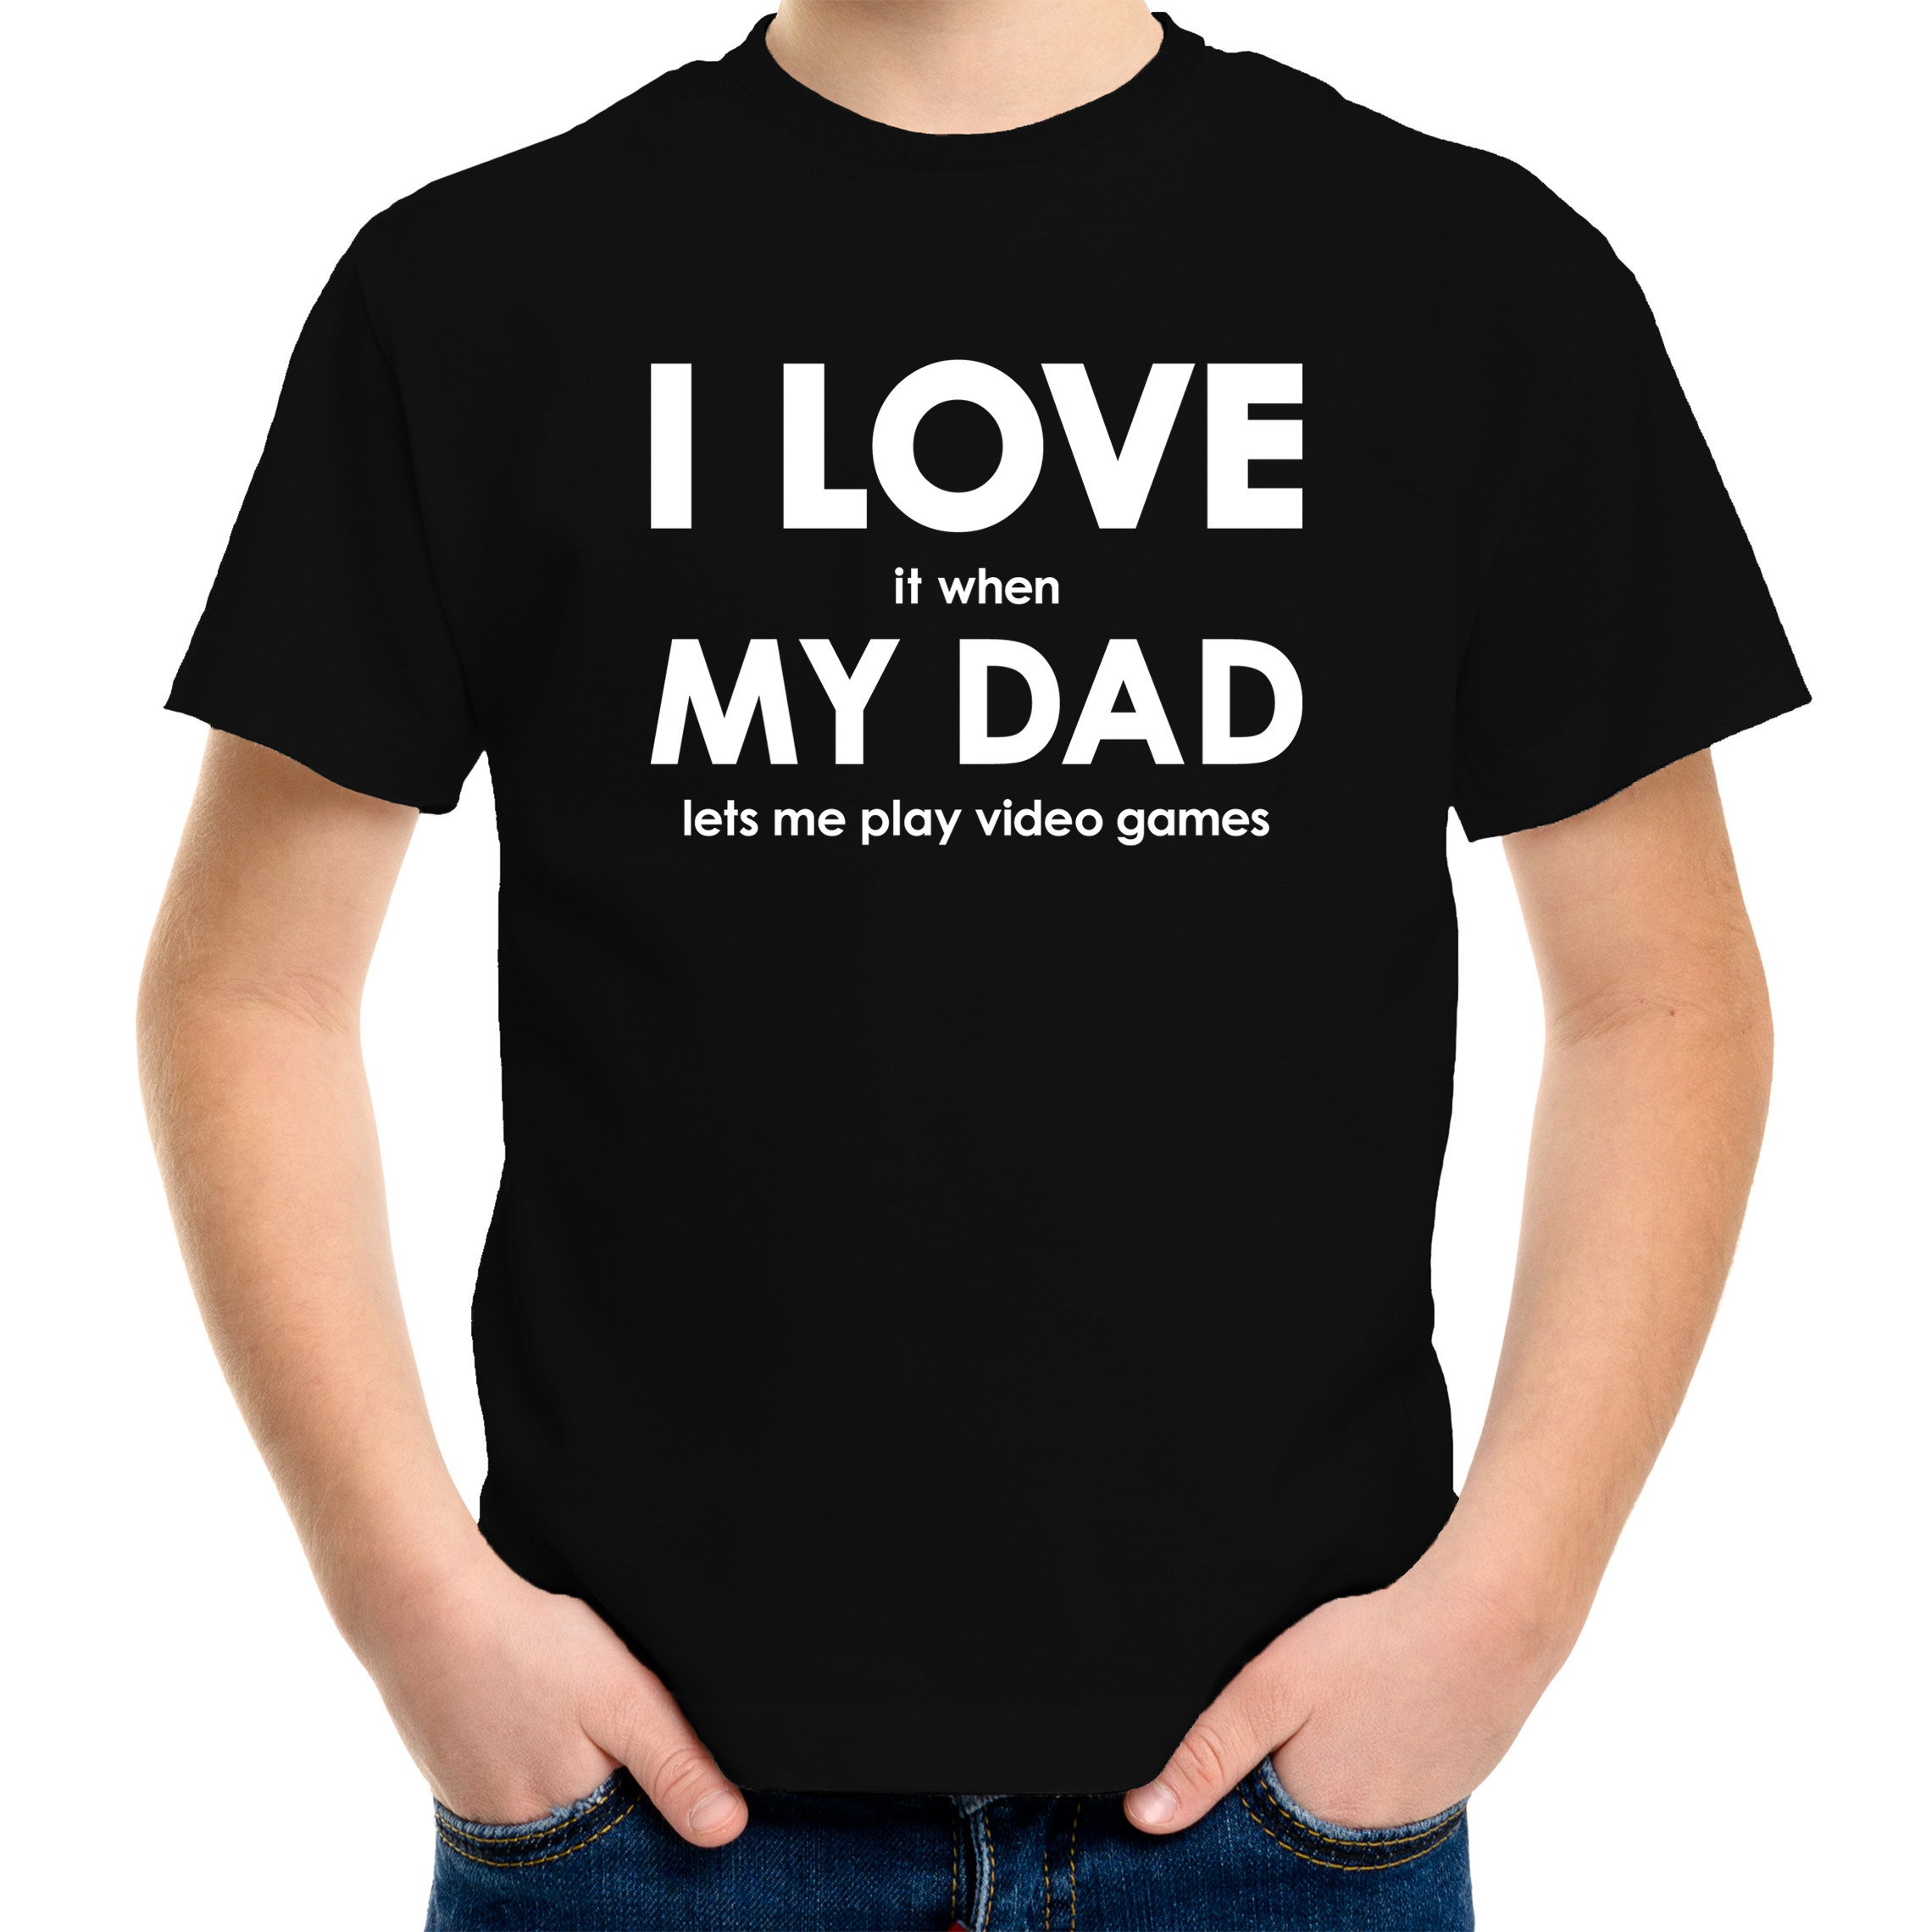 I love it when my dad lets me play video games t-shirts zwart voor kids